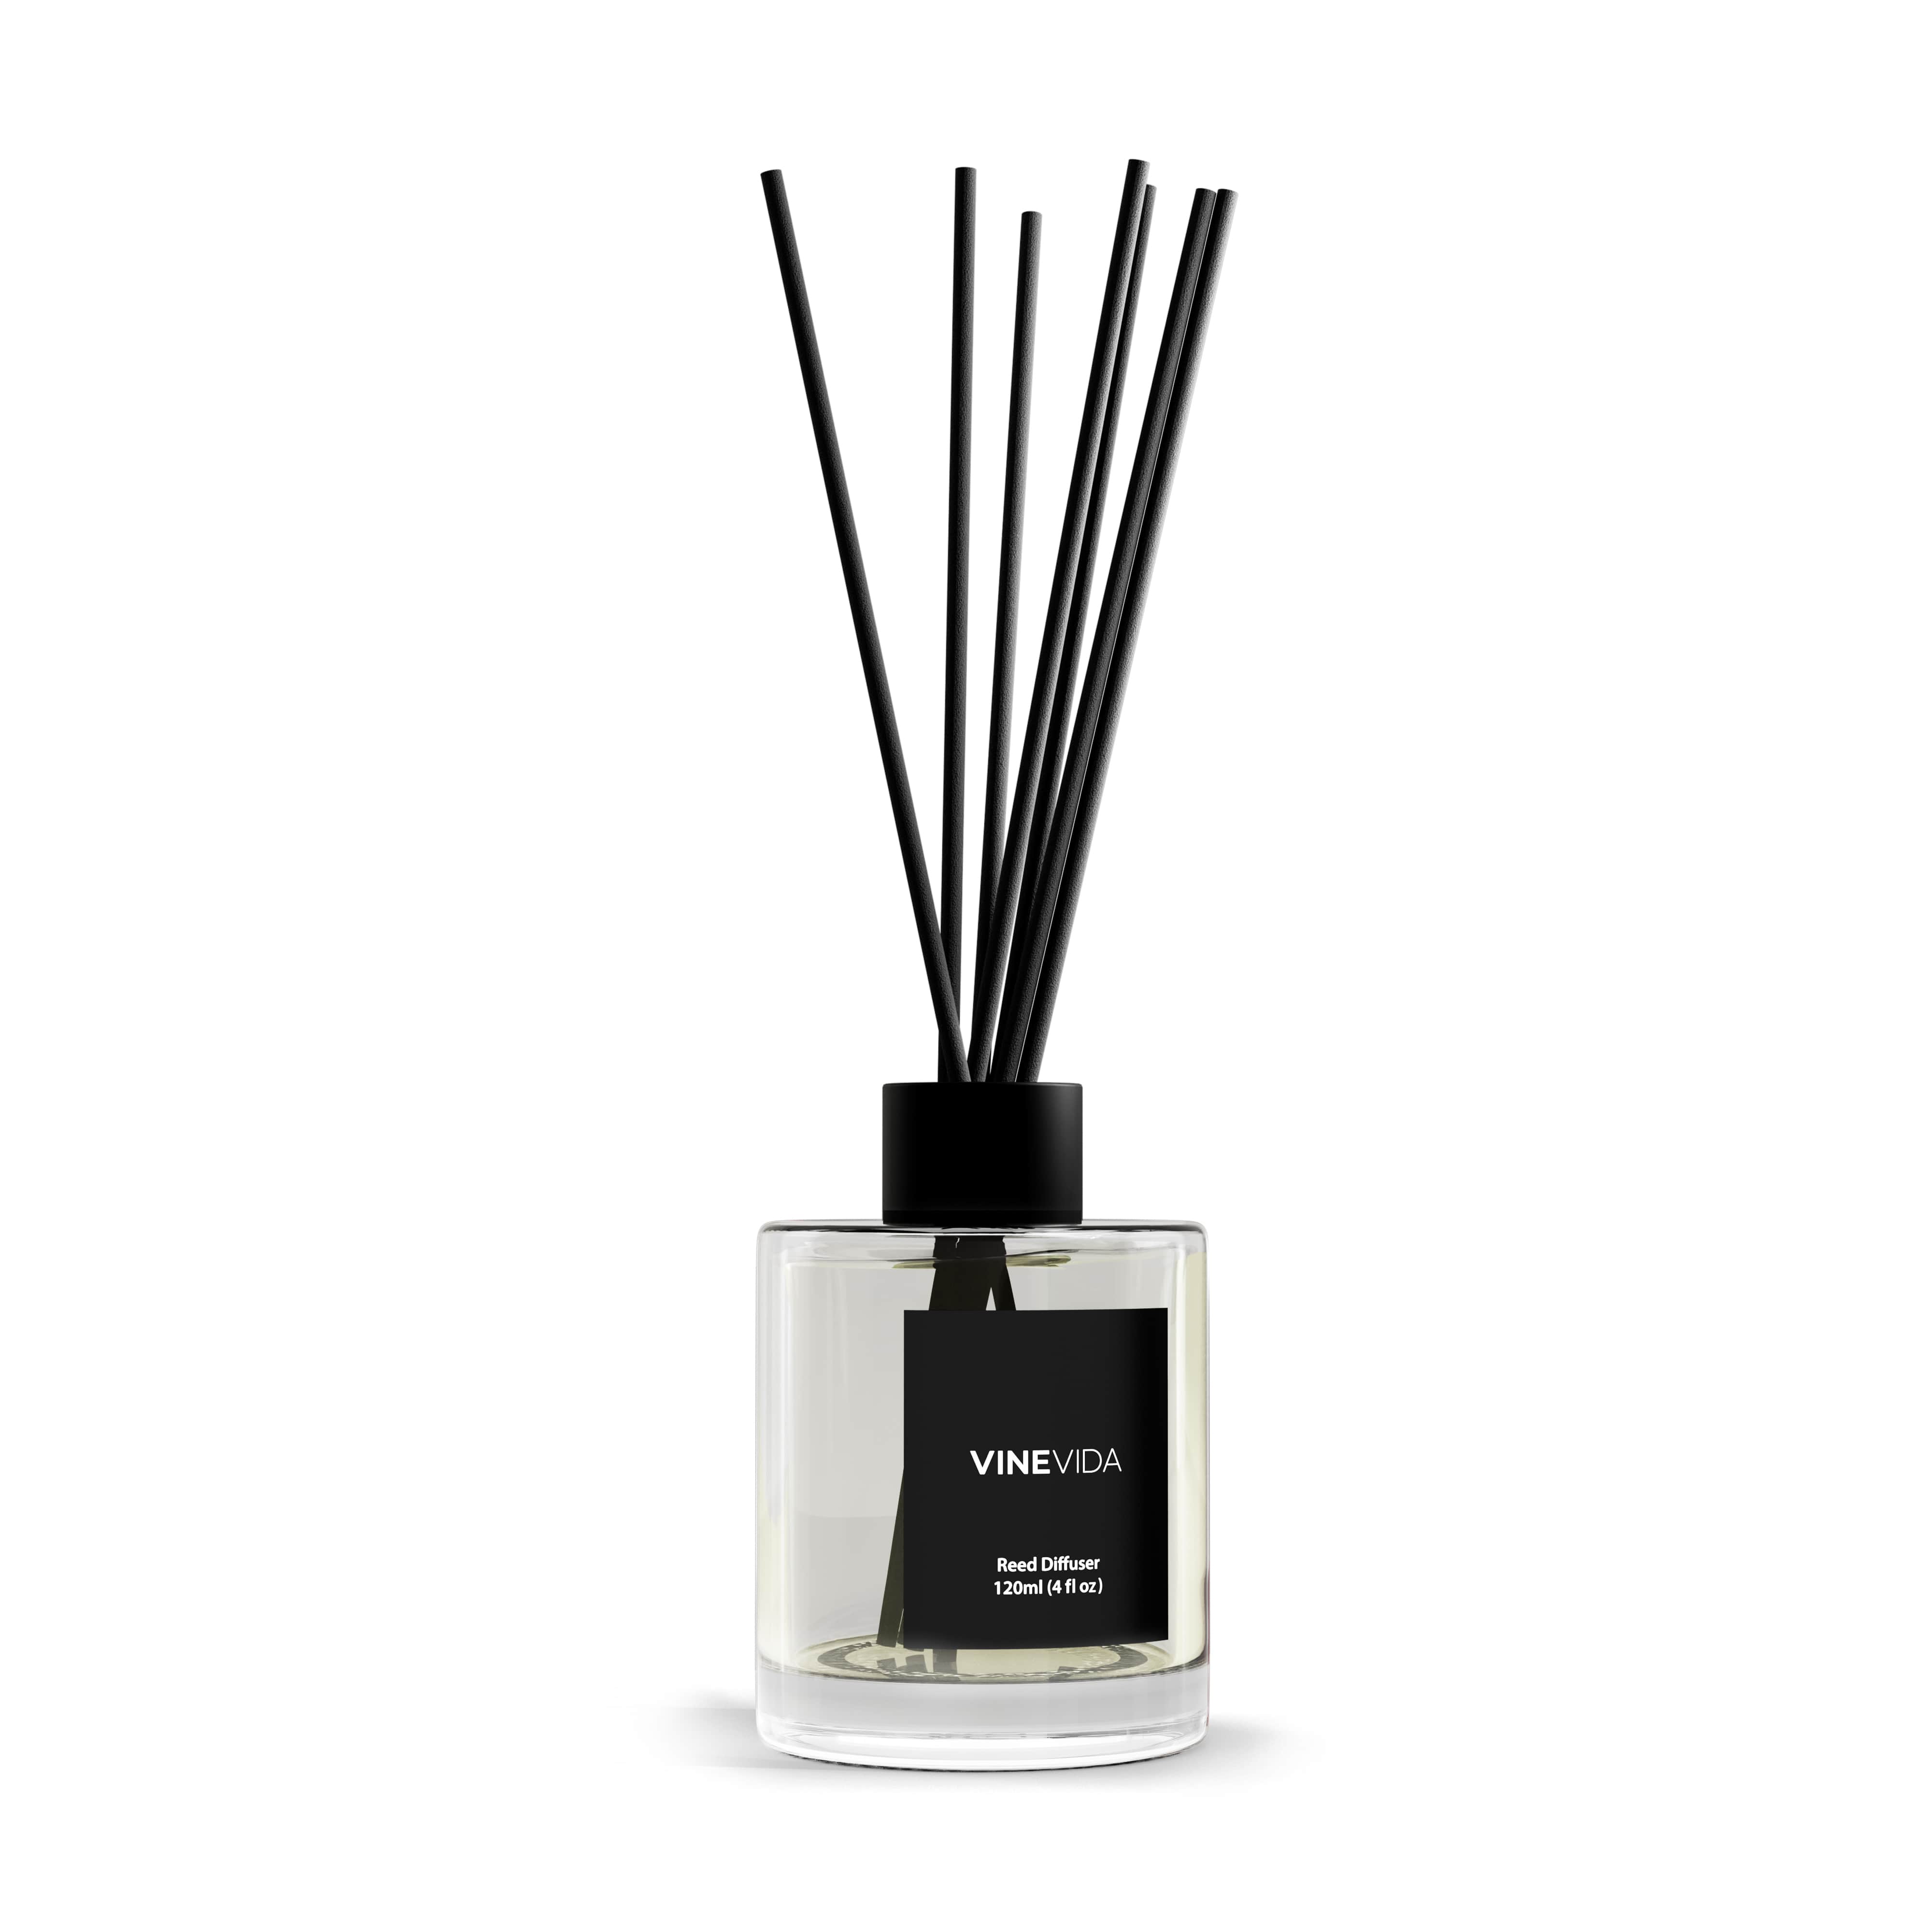 NO. 1104 Reed Diffuser - Inspired by: Buttercream Icing by Bath & Body Works